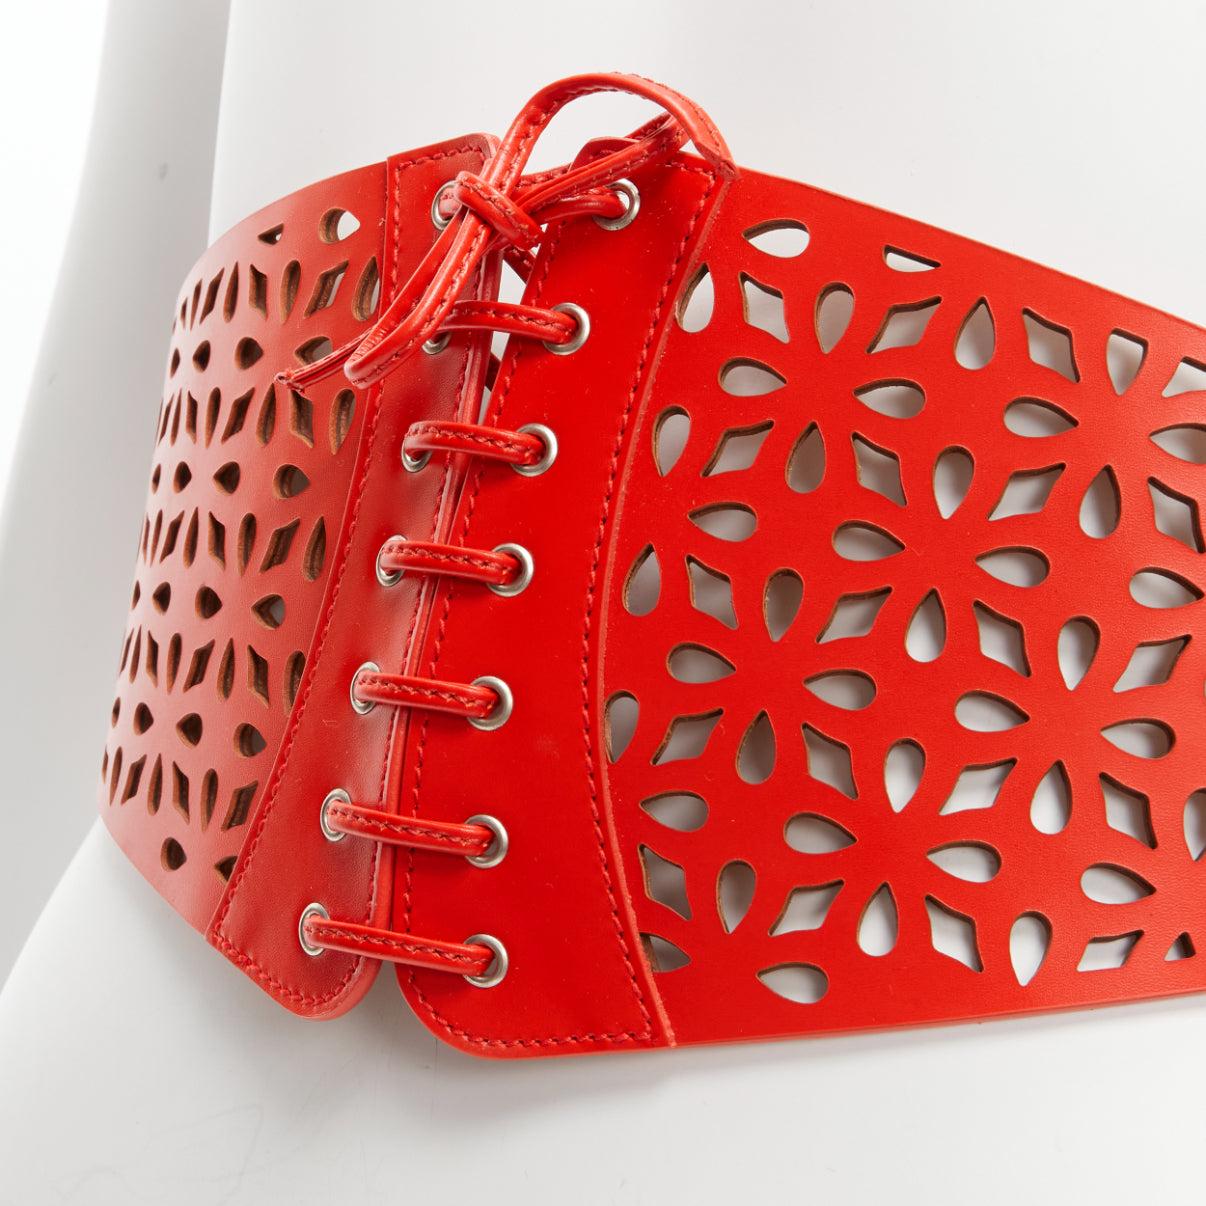 new AZZEDINE ALAIA red laser cut leather laced corset waist belt 70cm
Reference: BSHW/A00138
Brand: Alaia
Designer: Azzedine Alaia
Material: Leather
Color: Red
Pattern: Solid
Closure: Belt
Lining: Beige Leather
Extra Details: Belt buckle closure